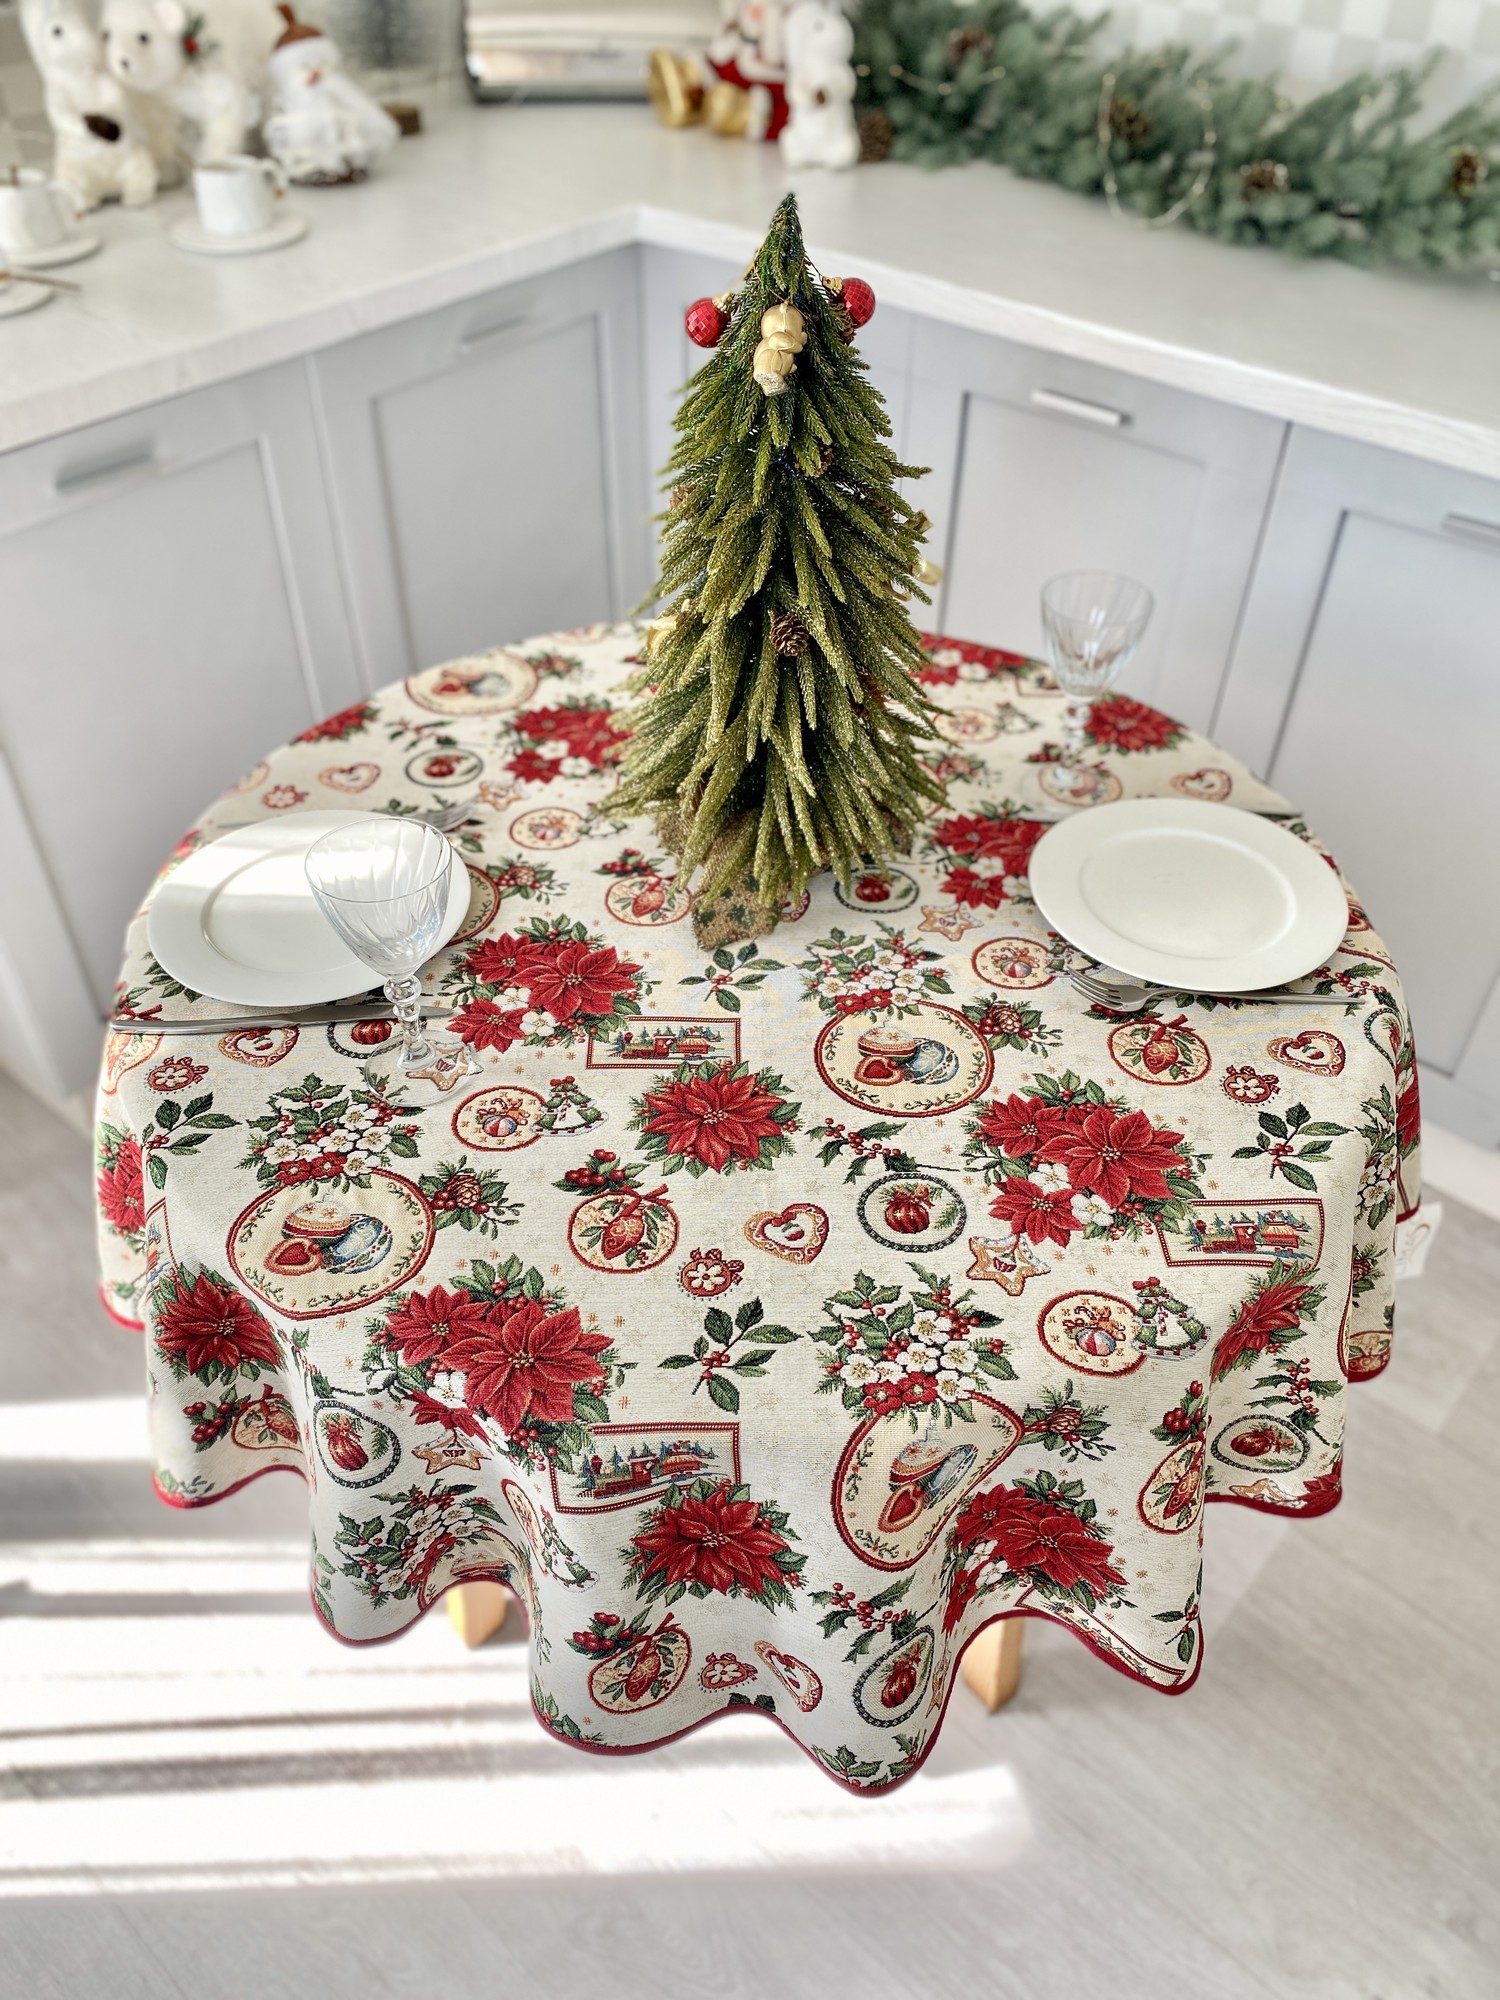 Christmas tapestry tablecloth for round table ø140 cm (55 in), with gold lurex round festive tablecloth